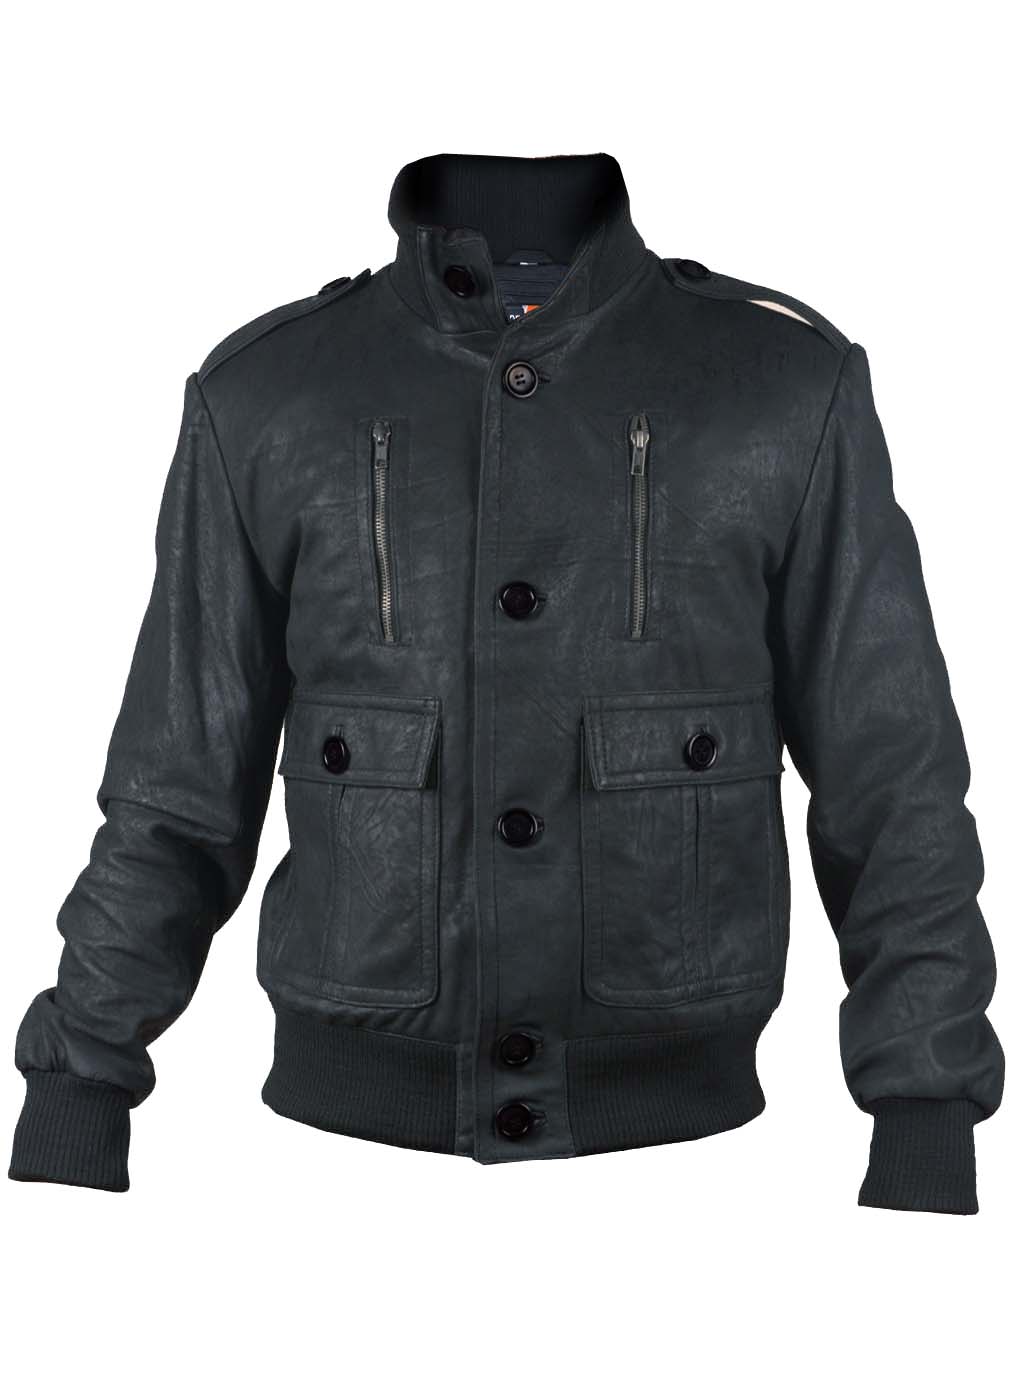 Download this Bomber Leather Jackets... picture